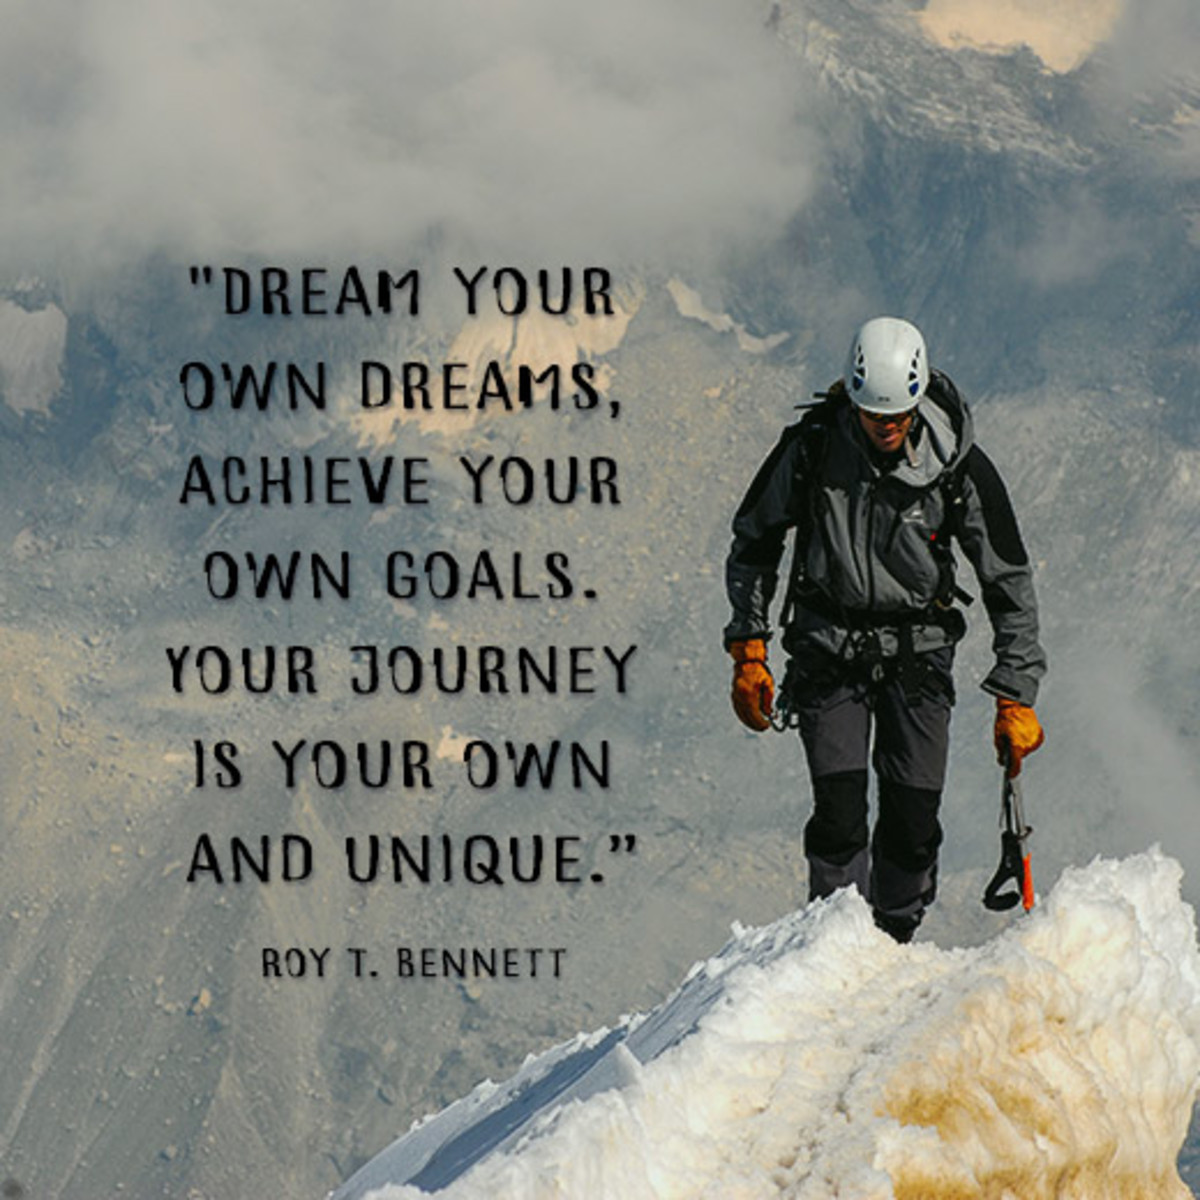 "Dream your own dreams, achieve your own goals. Your journey is your own and unique.” ― Roy T. Bennett